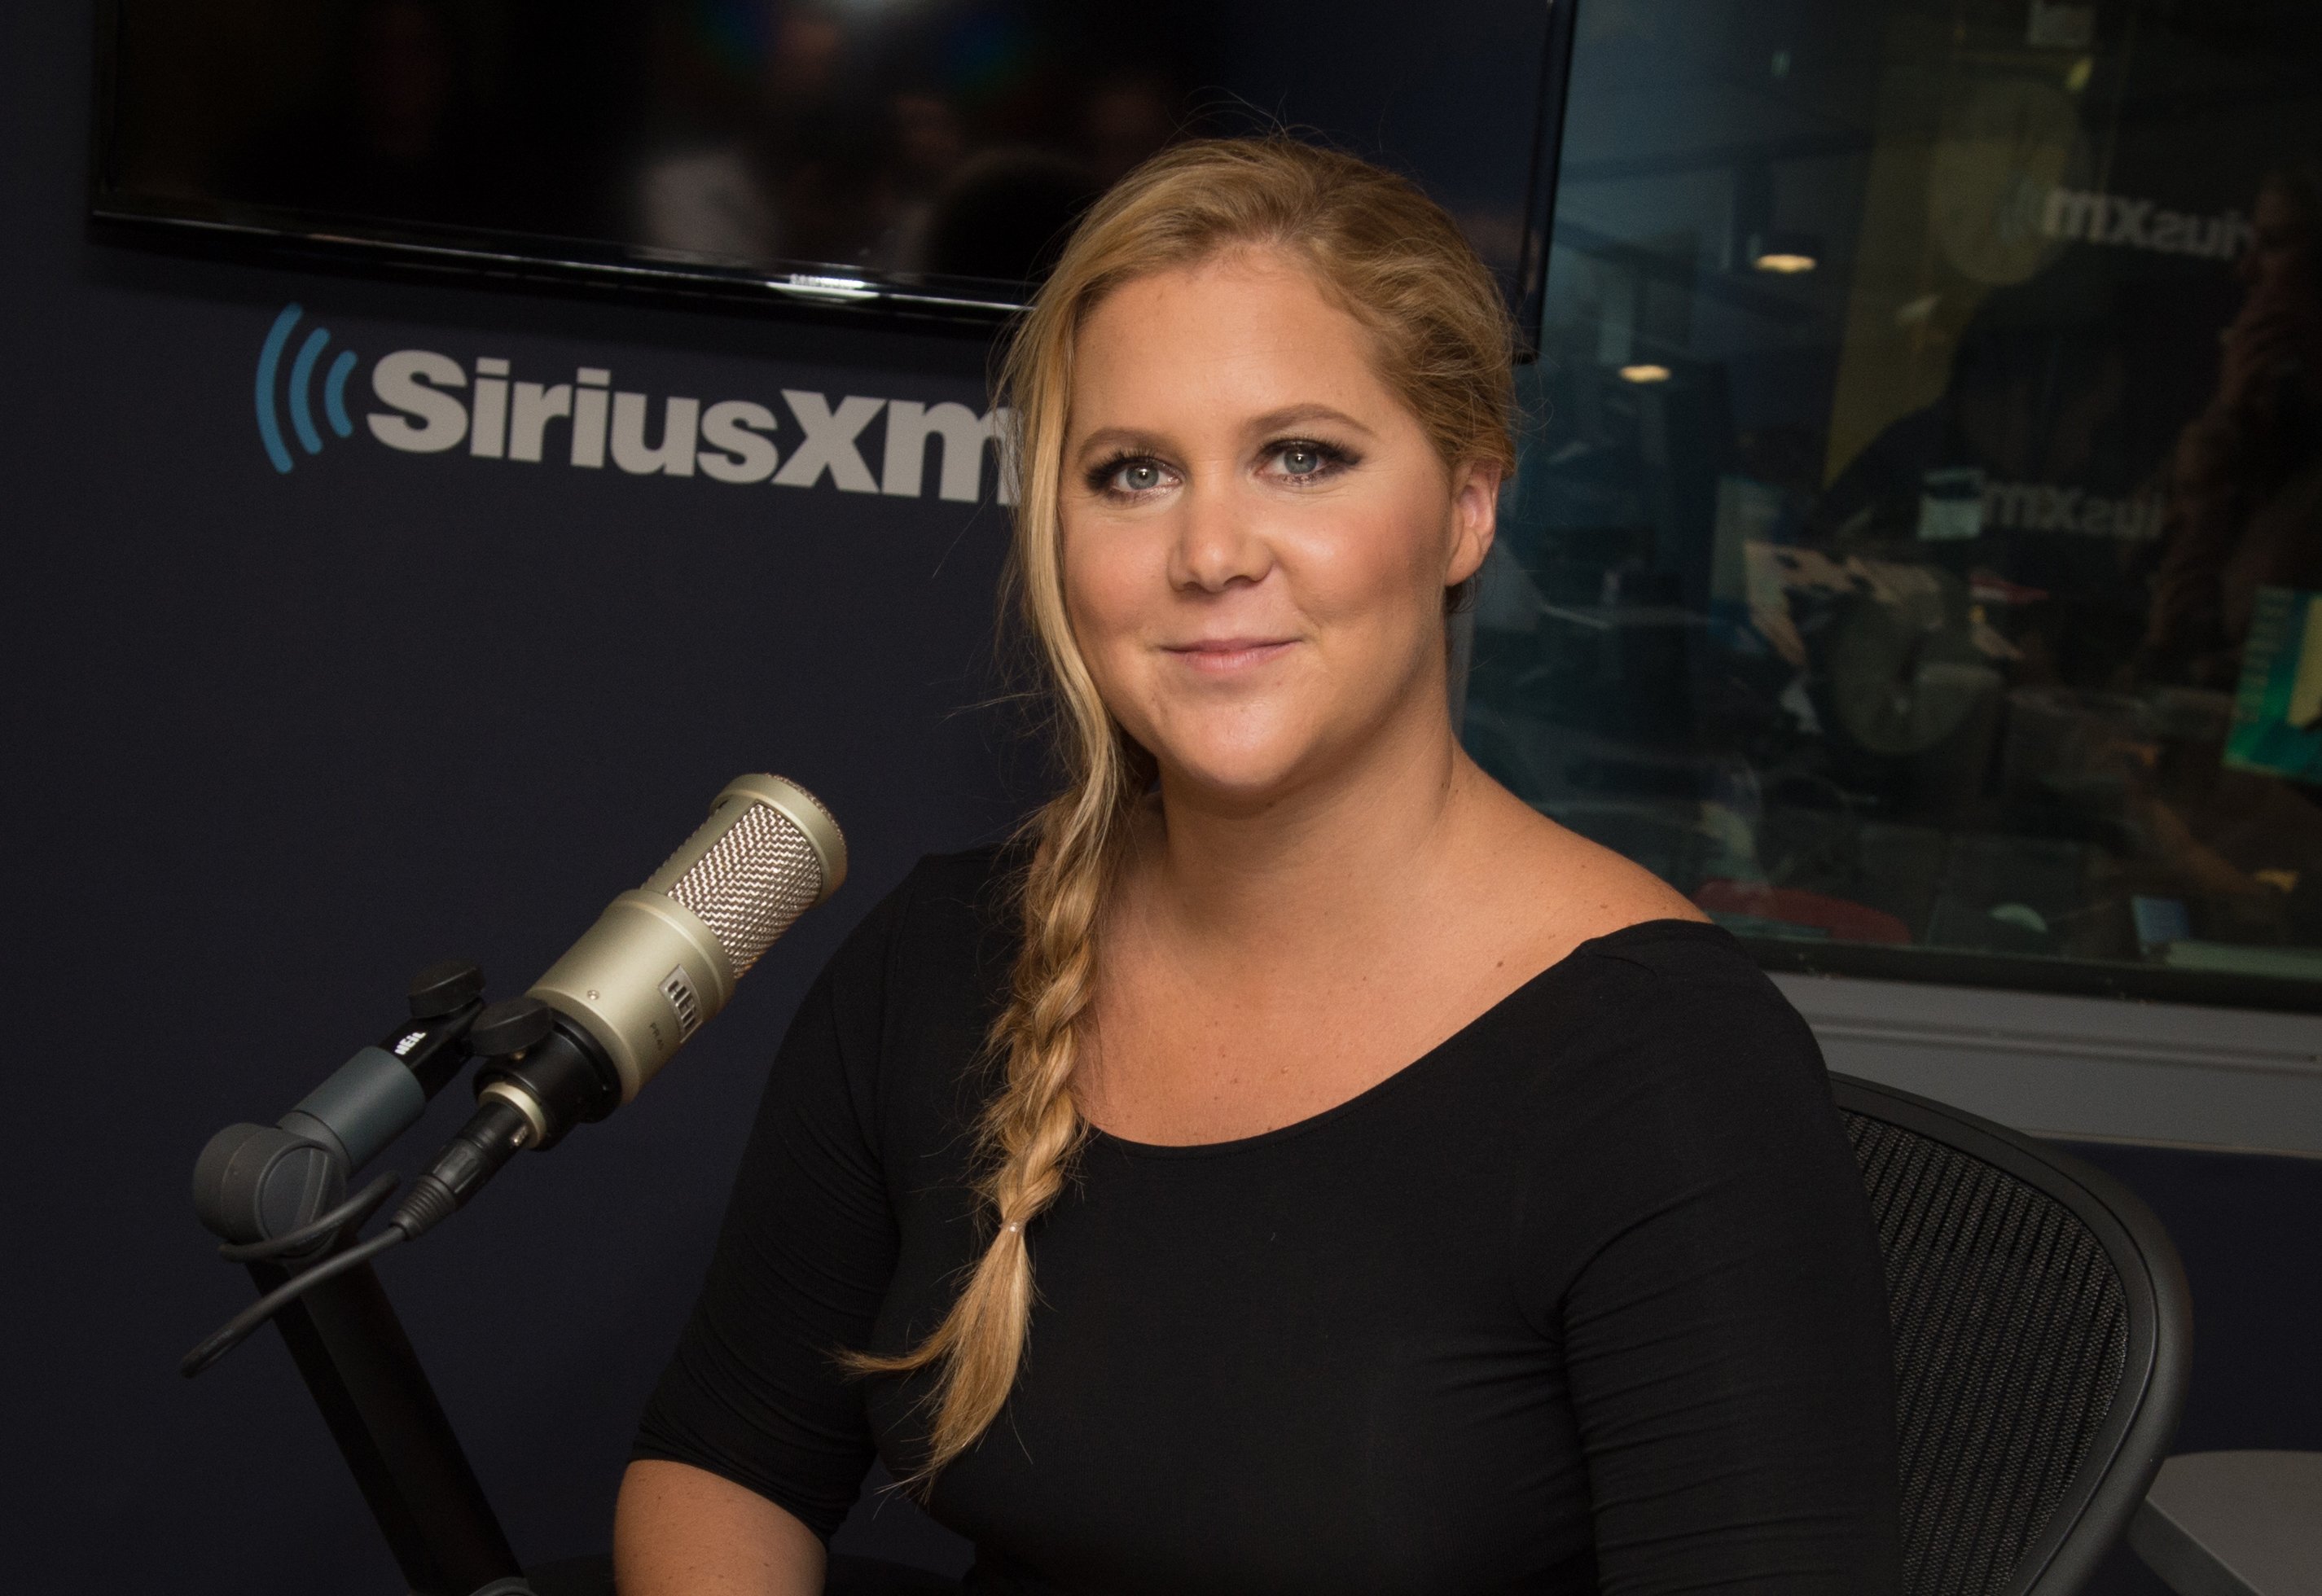 Actress and comedian Amy Schumer during her 2016 visit at the SiriusXM Studio in New York City. | Photo: Getty Images